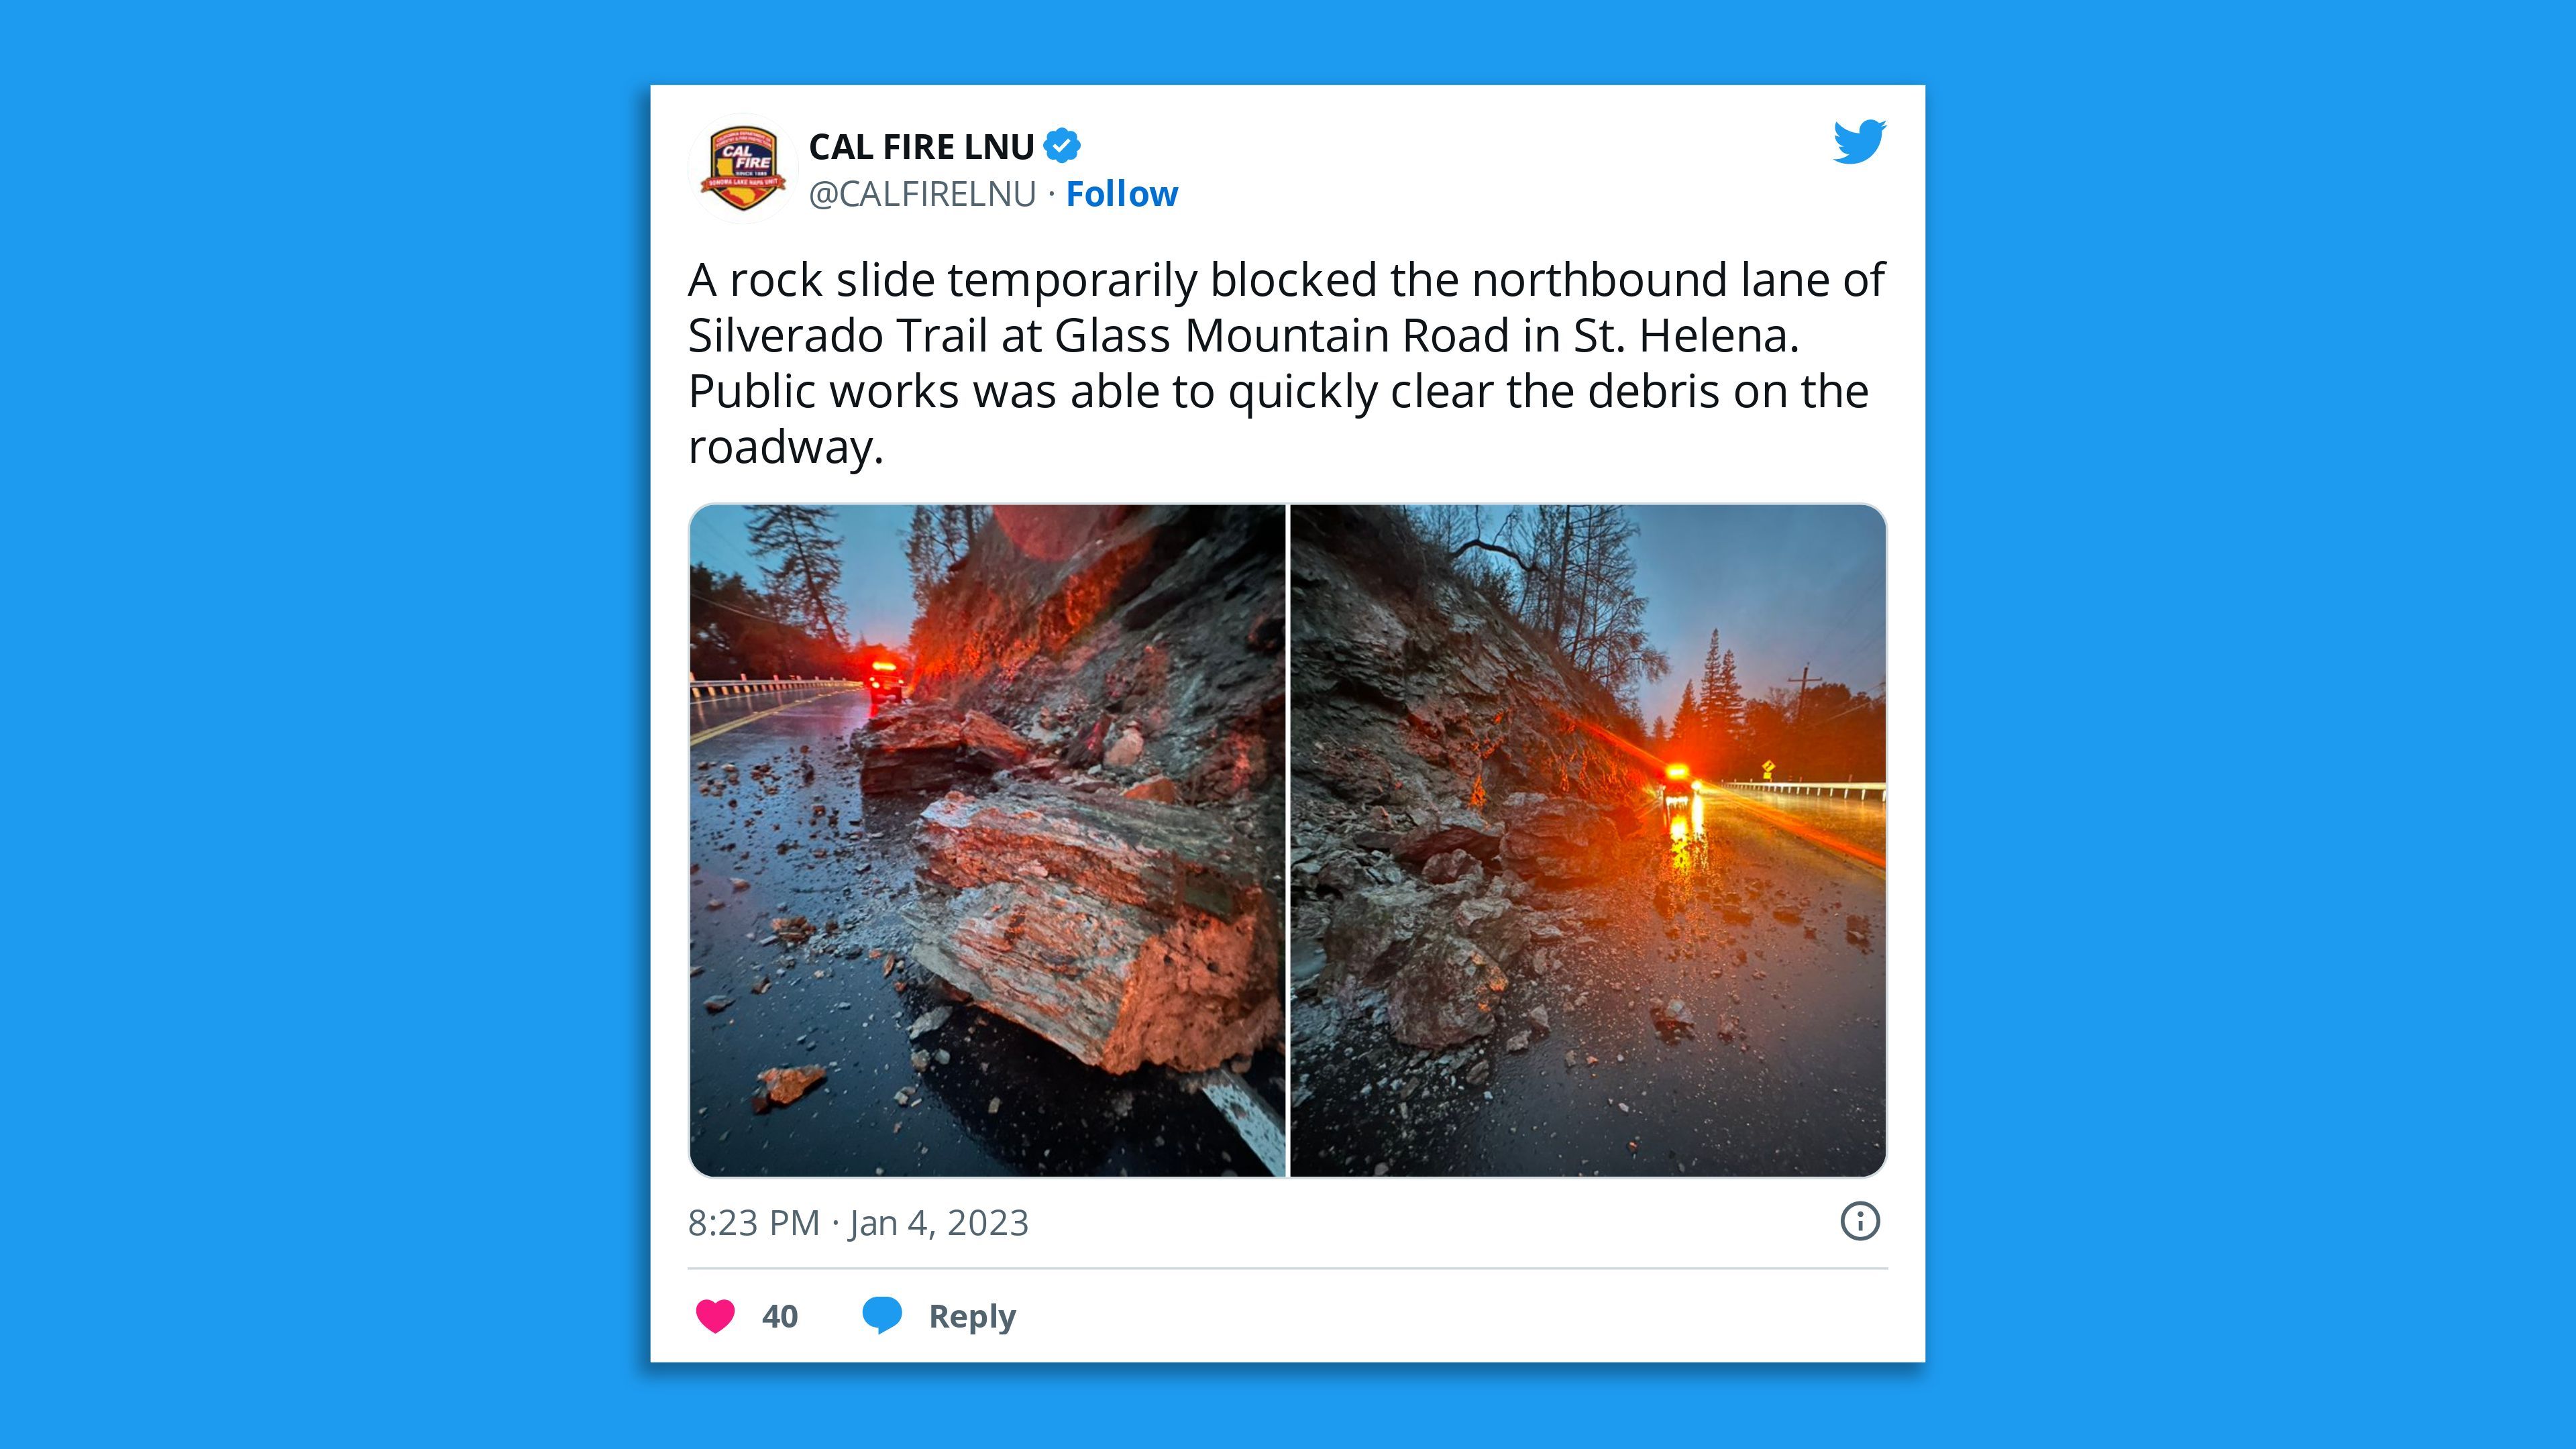 A screenshot of a Twitter image showing a rockslide in the Bay Area of California on Jan. 4.